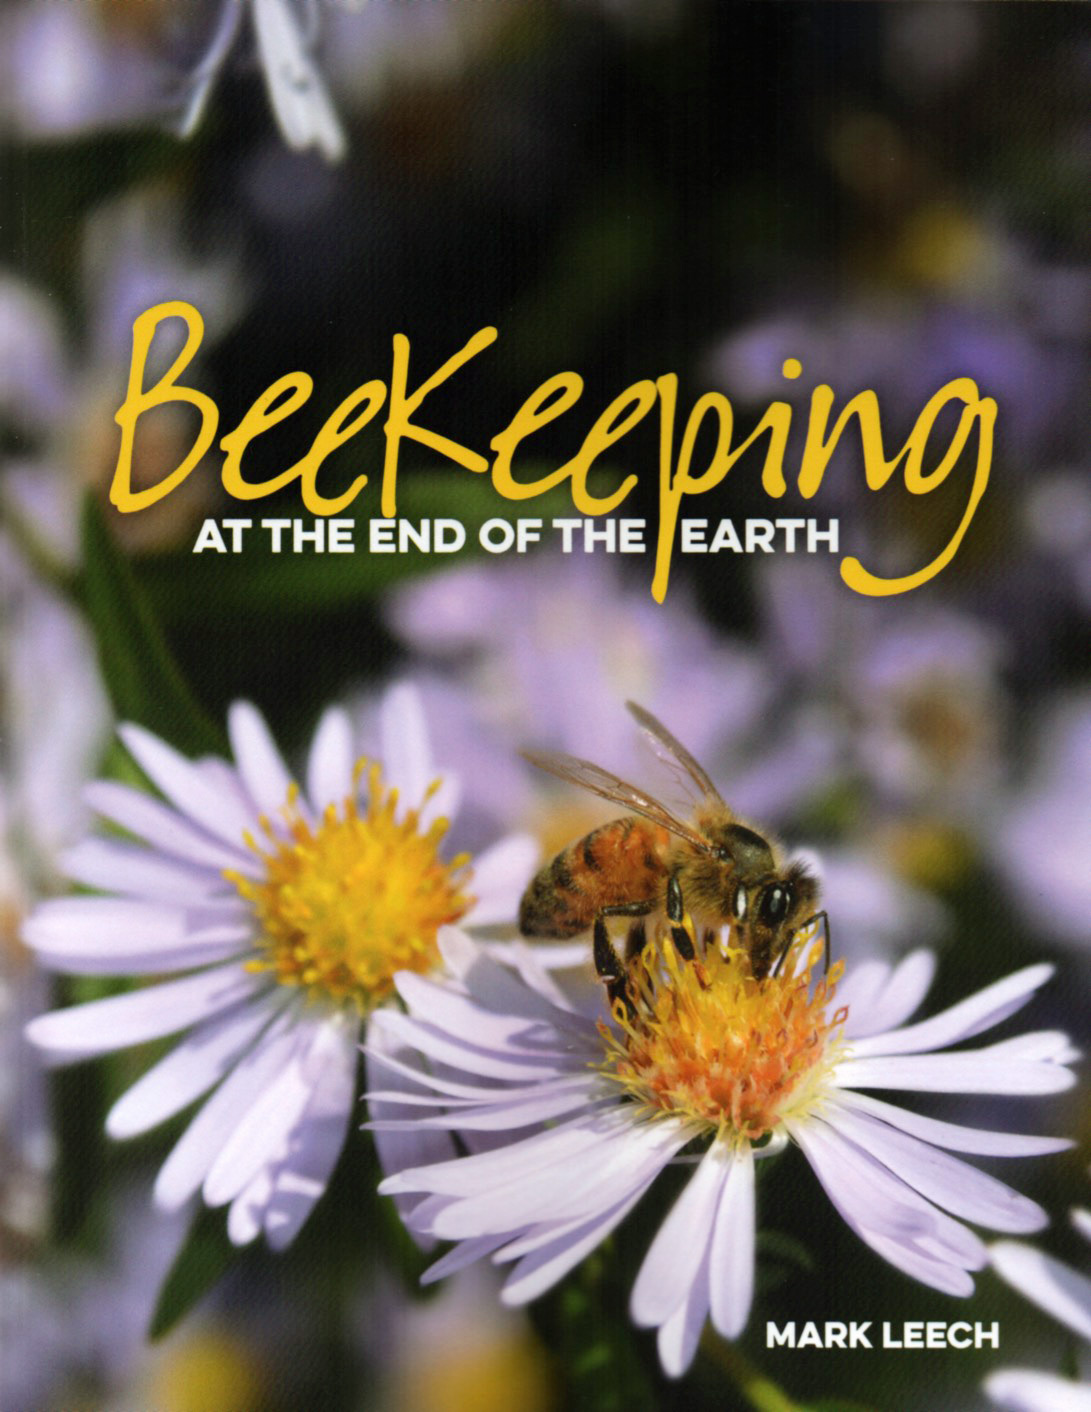 Beekeeping at the End of the Earth